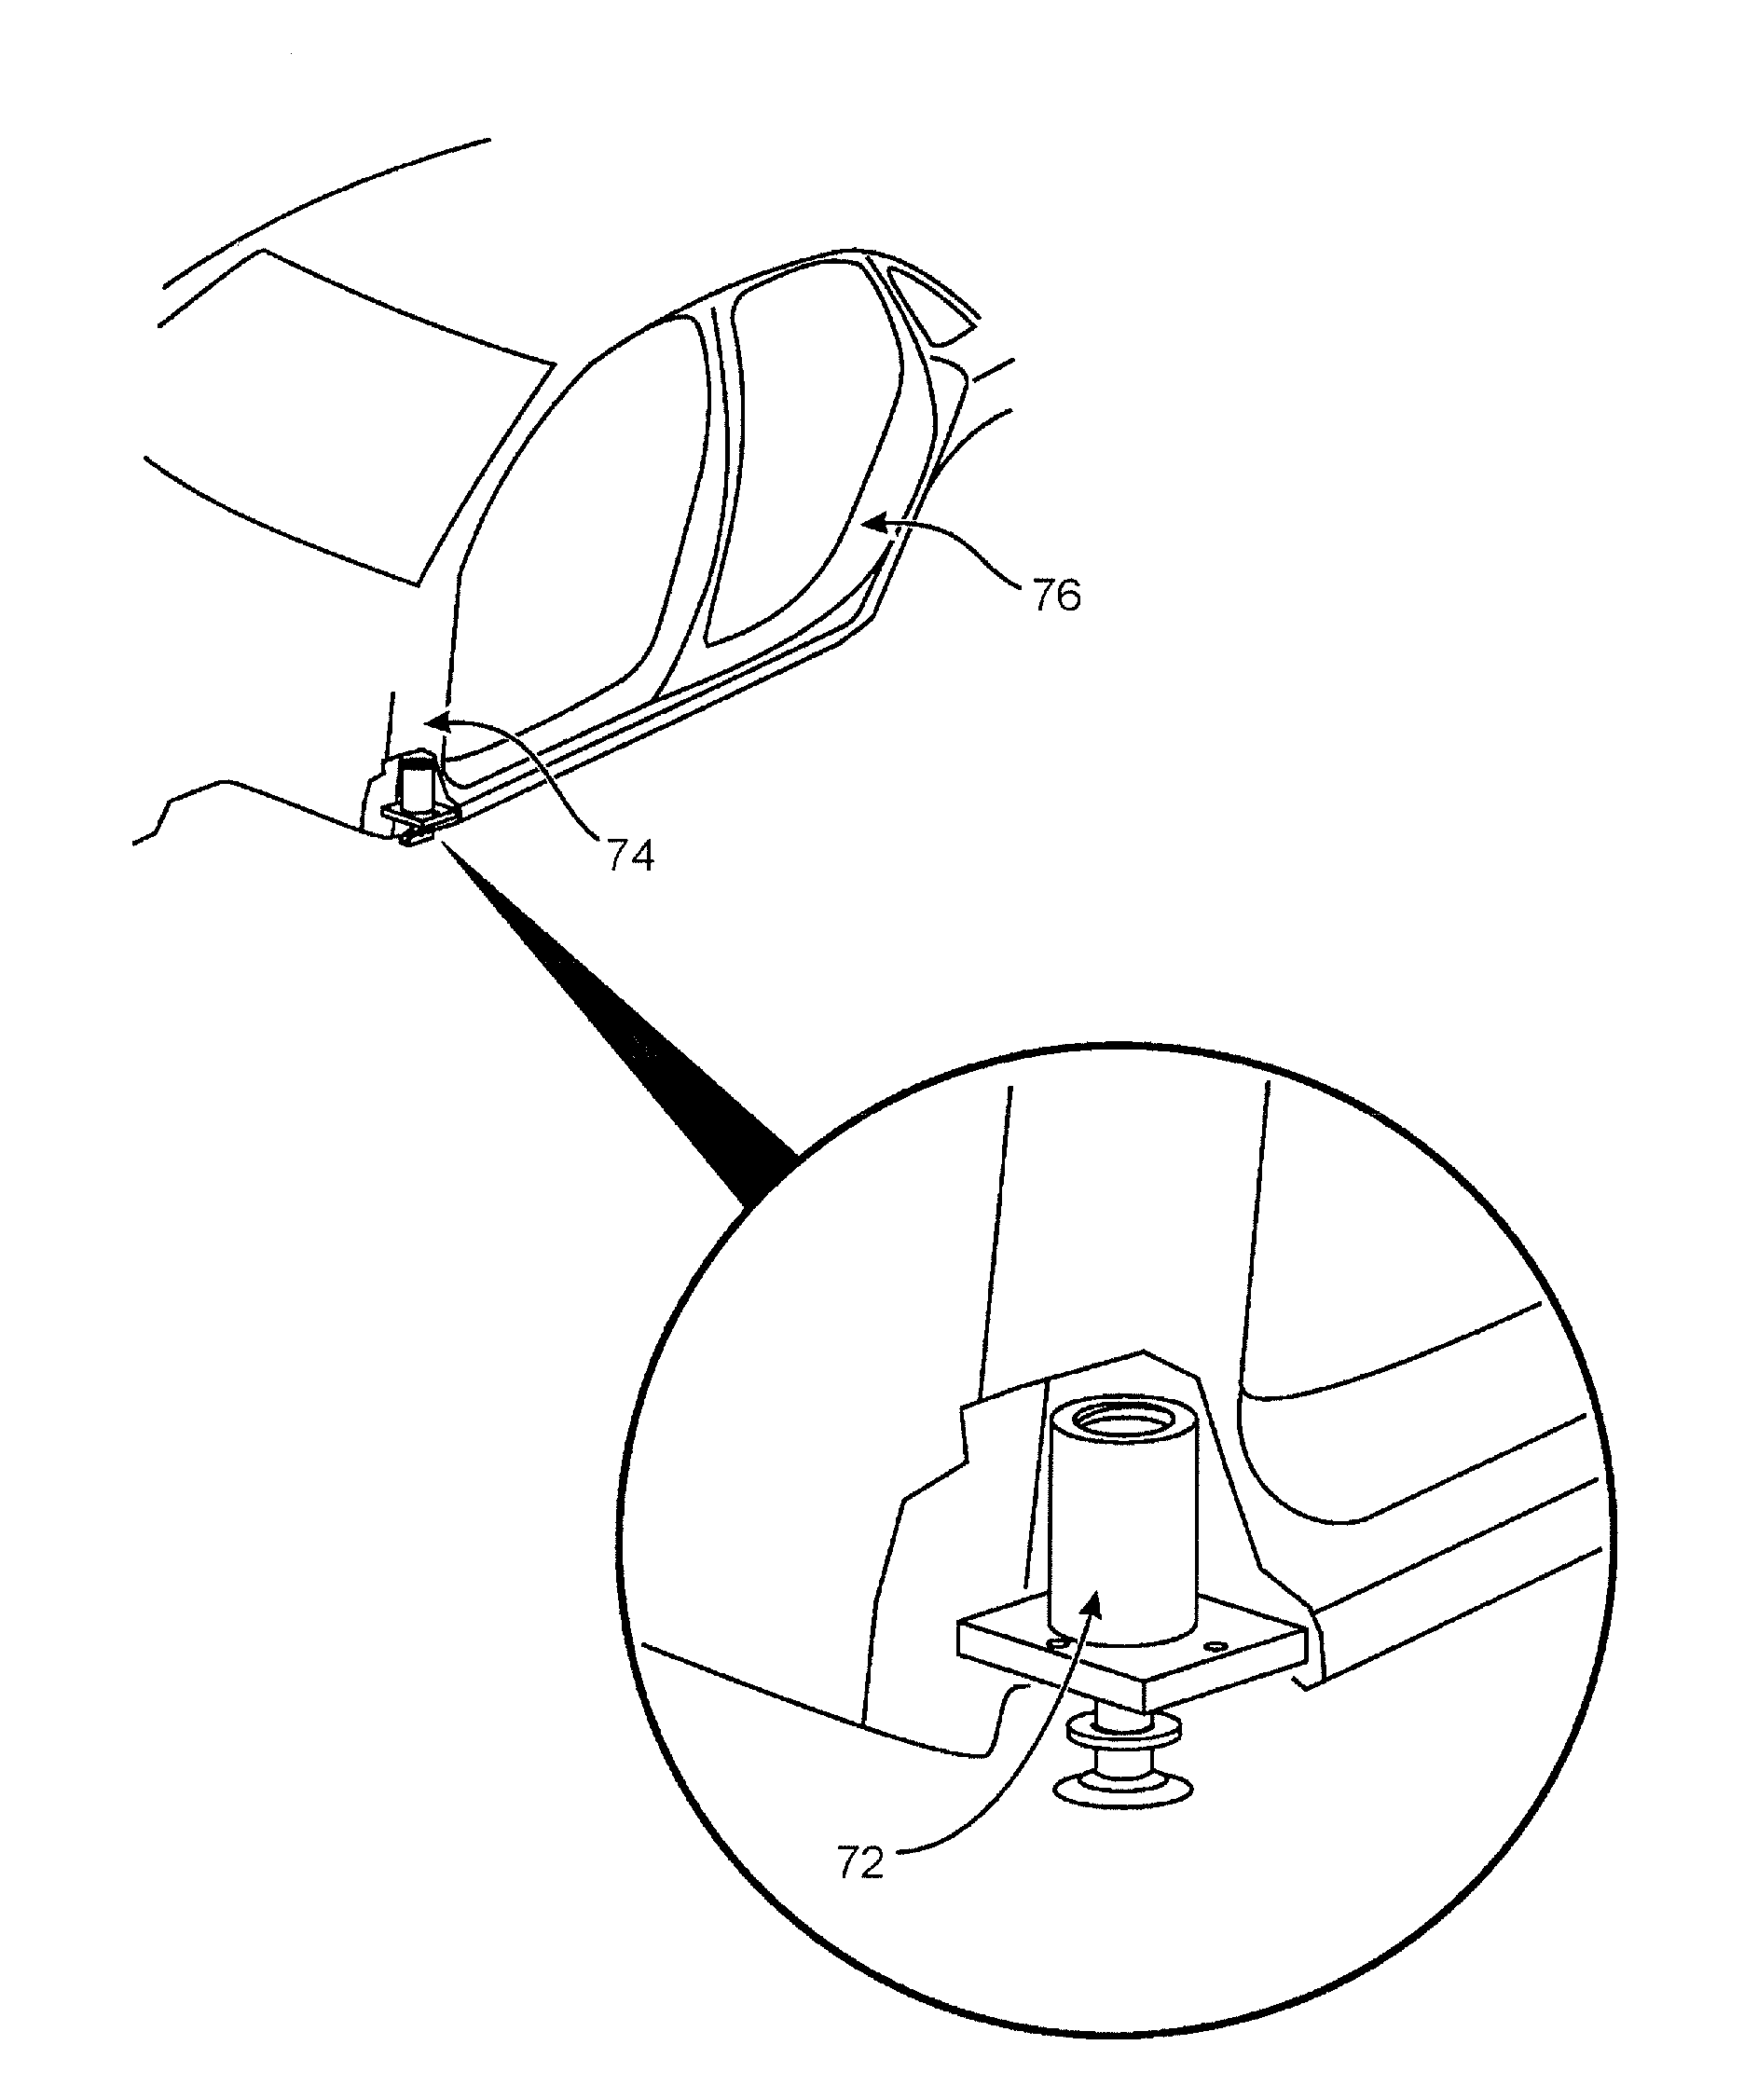 Electronic interface control system for a pneumatic vehicle safety lift system